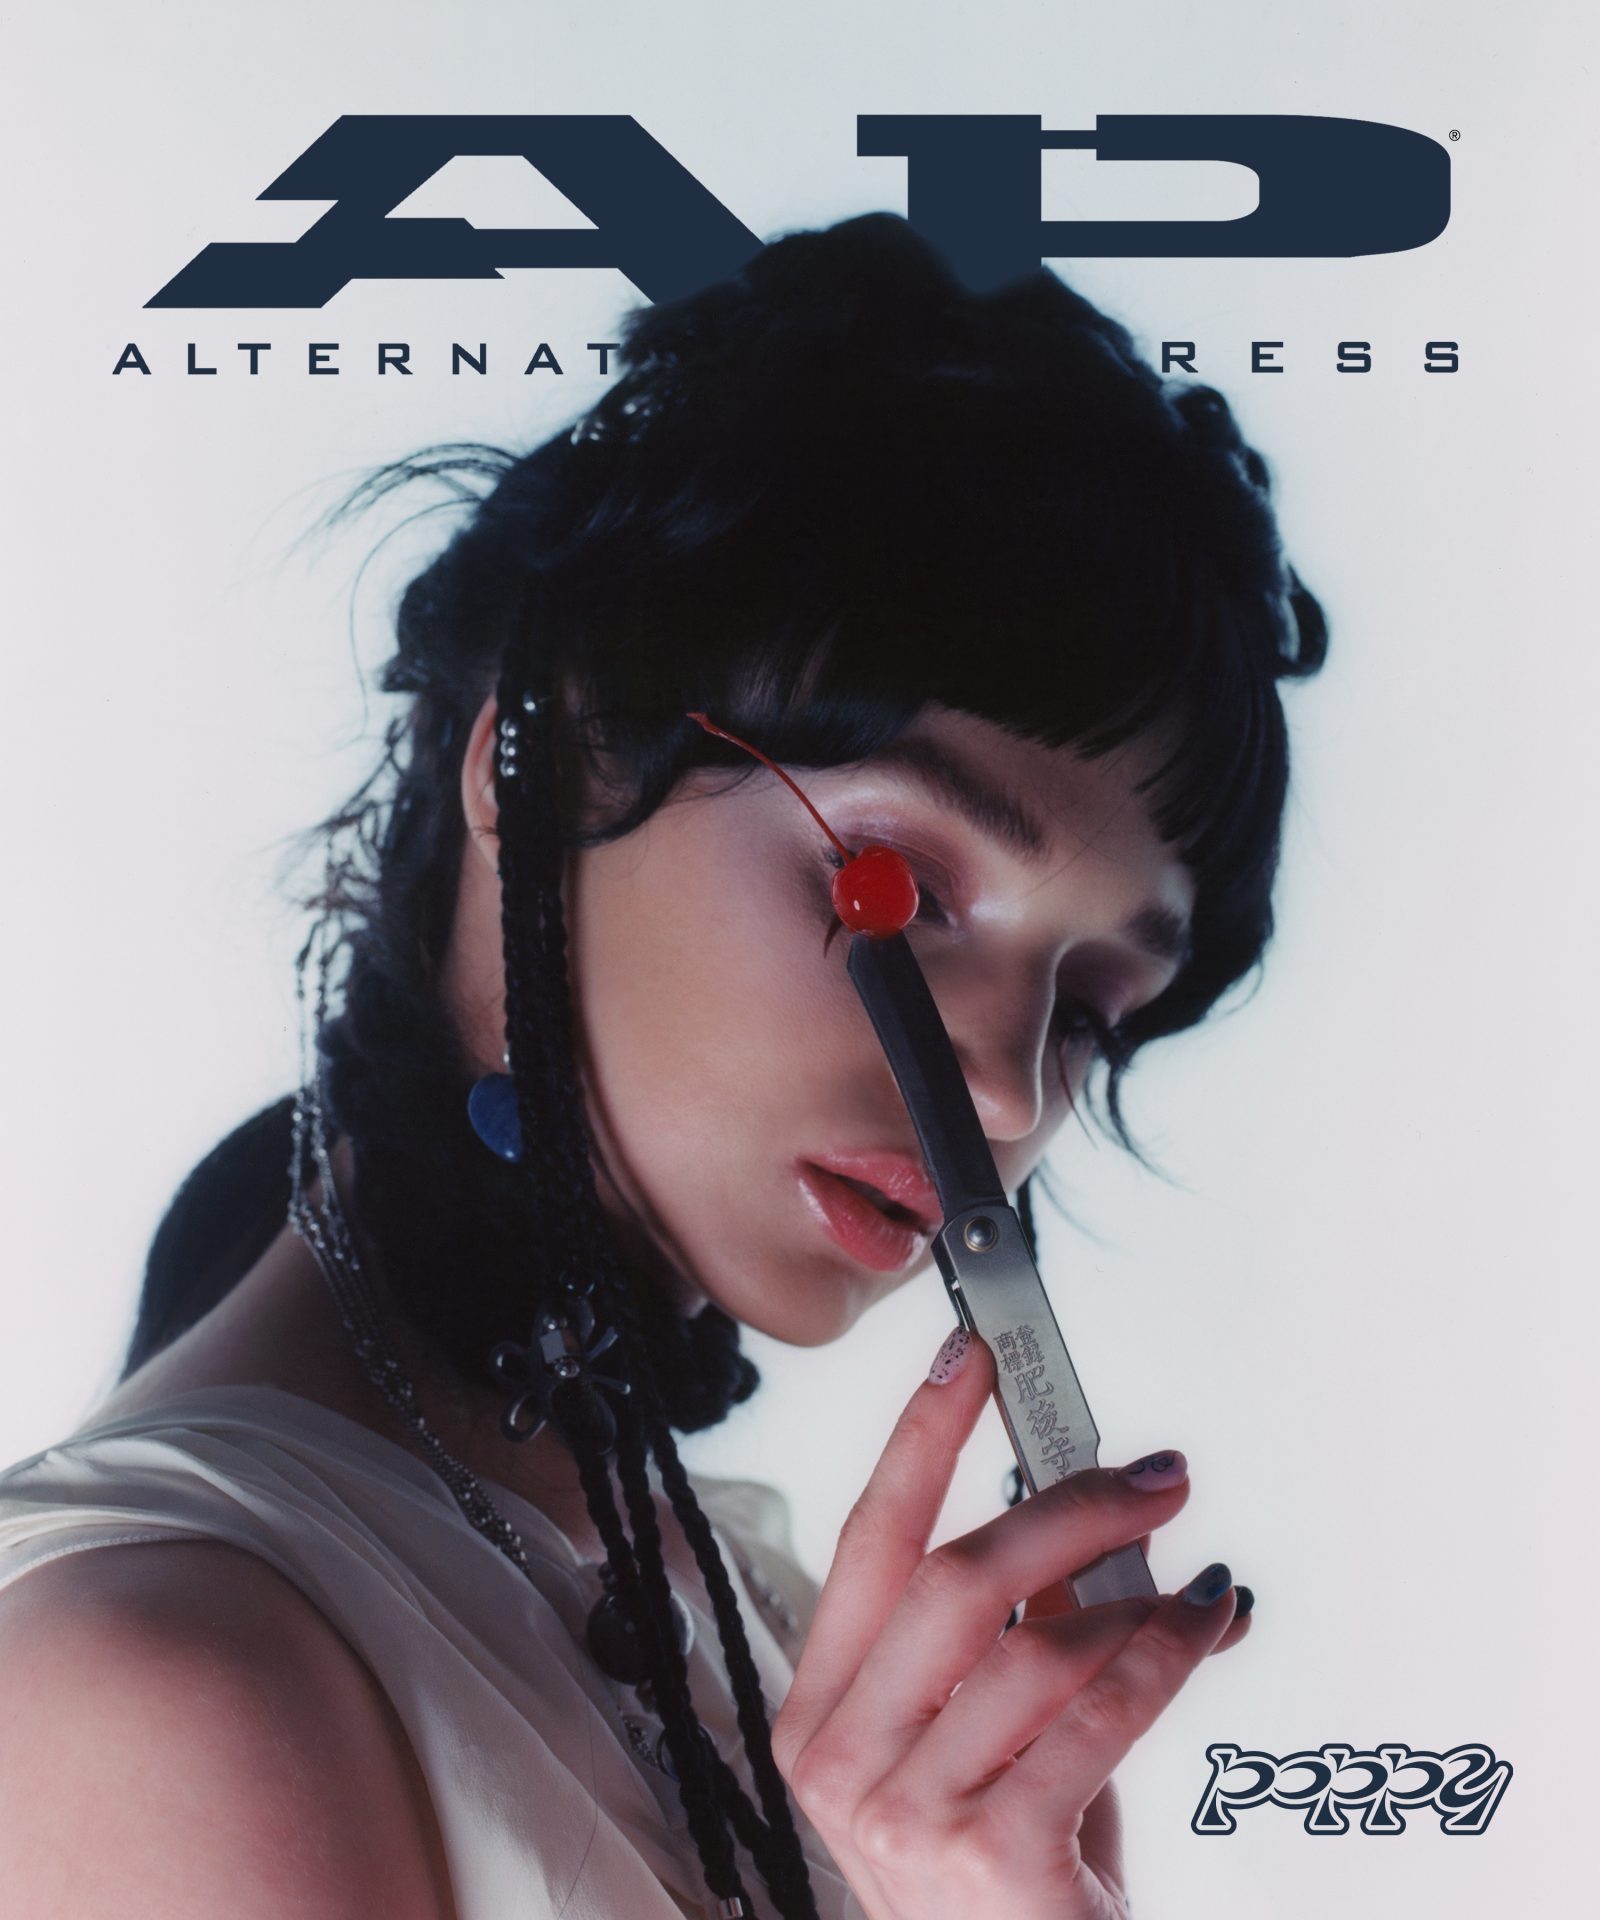 Poppy appears on the cover of Alternative Press' Fall 2023 Issue